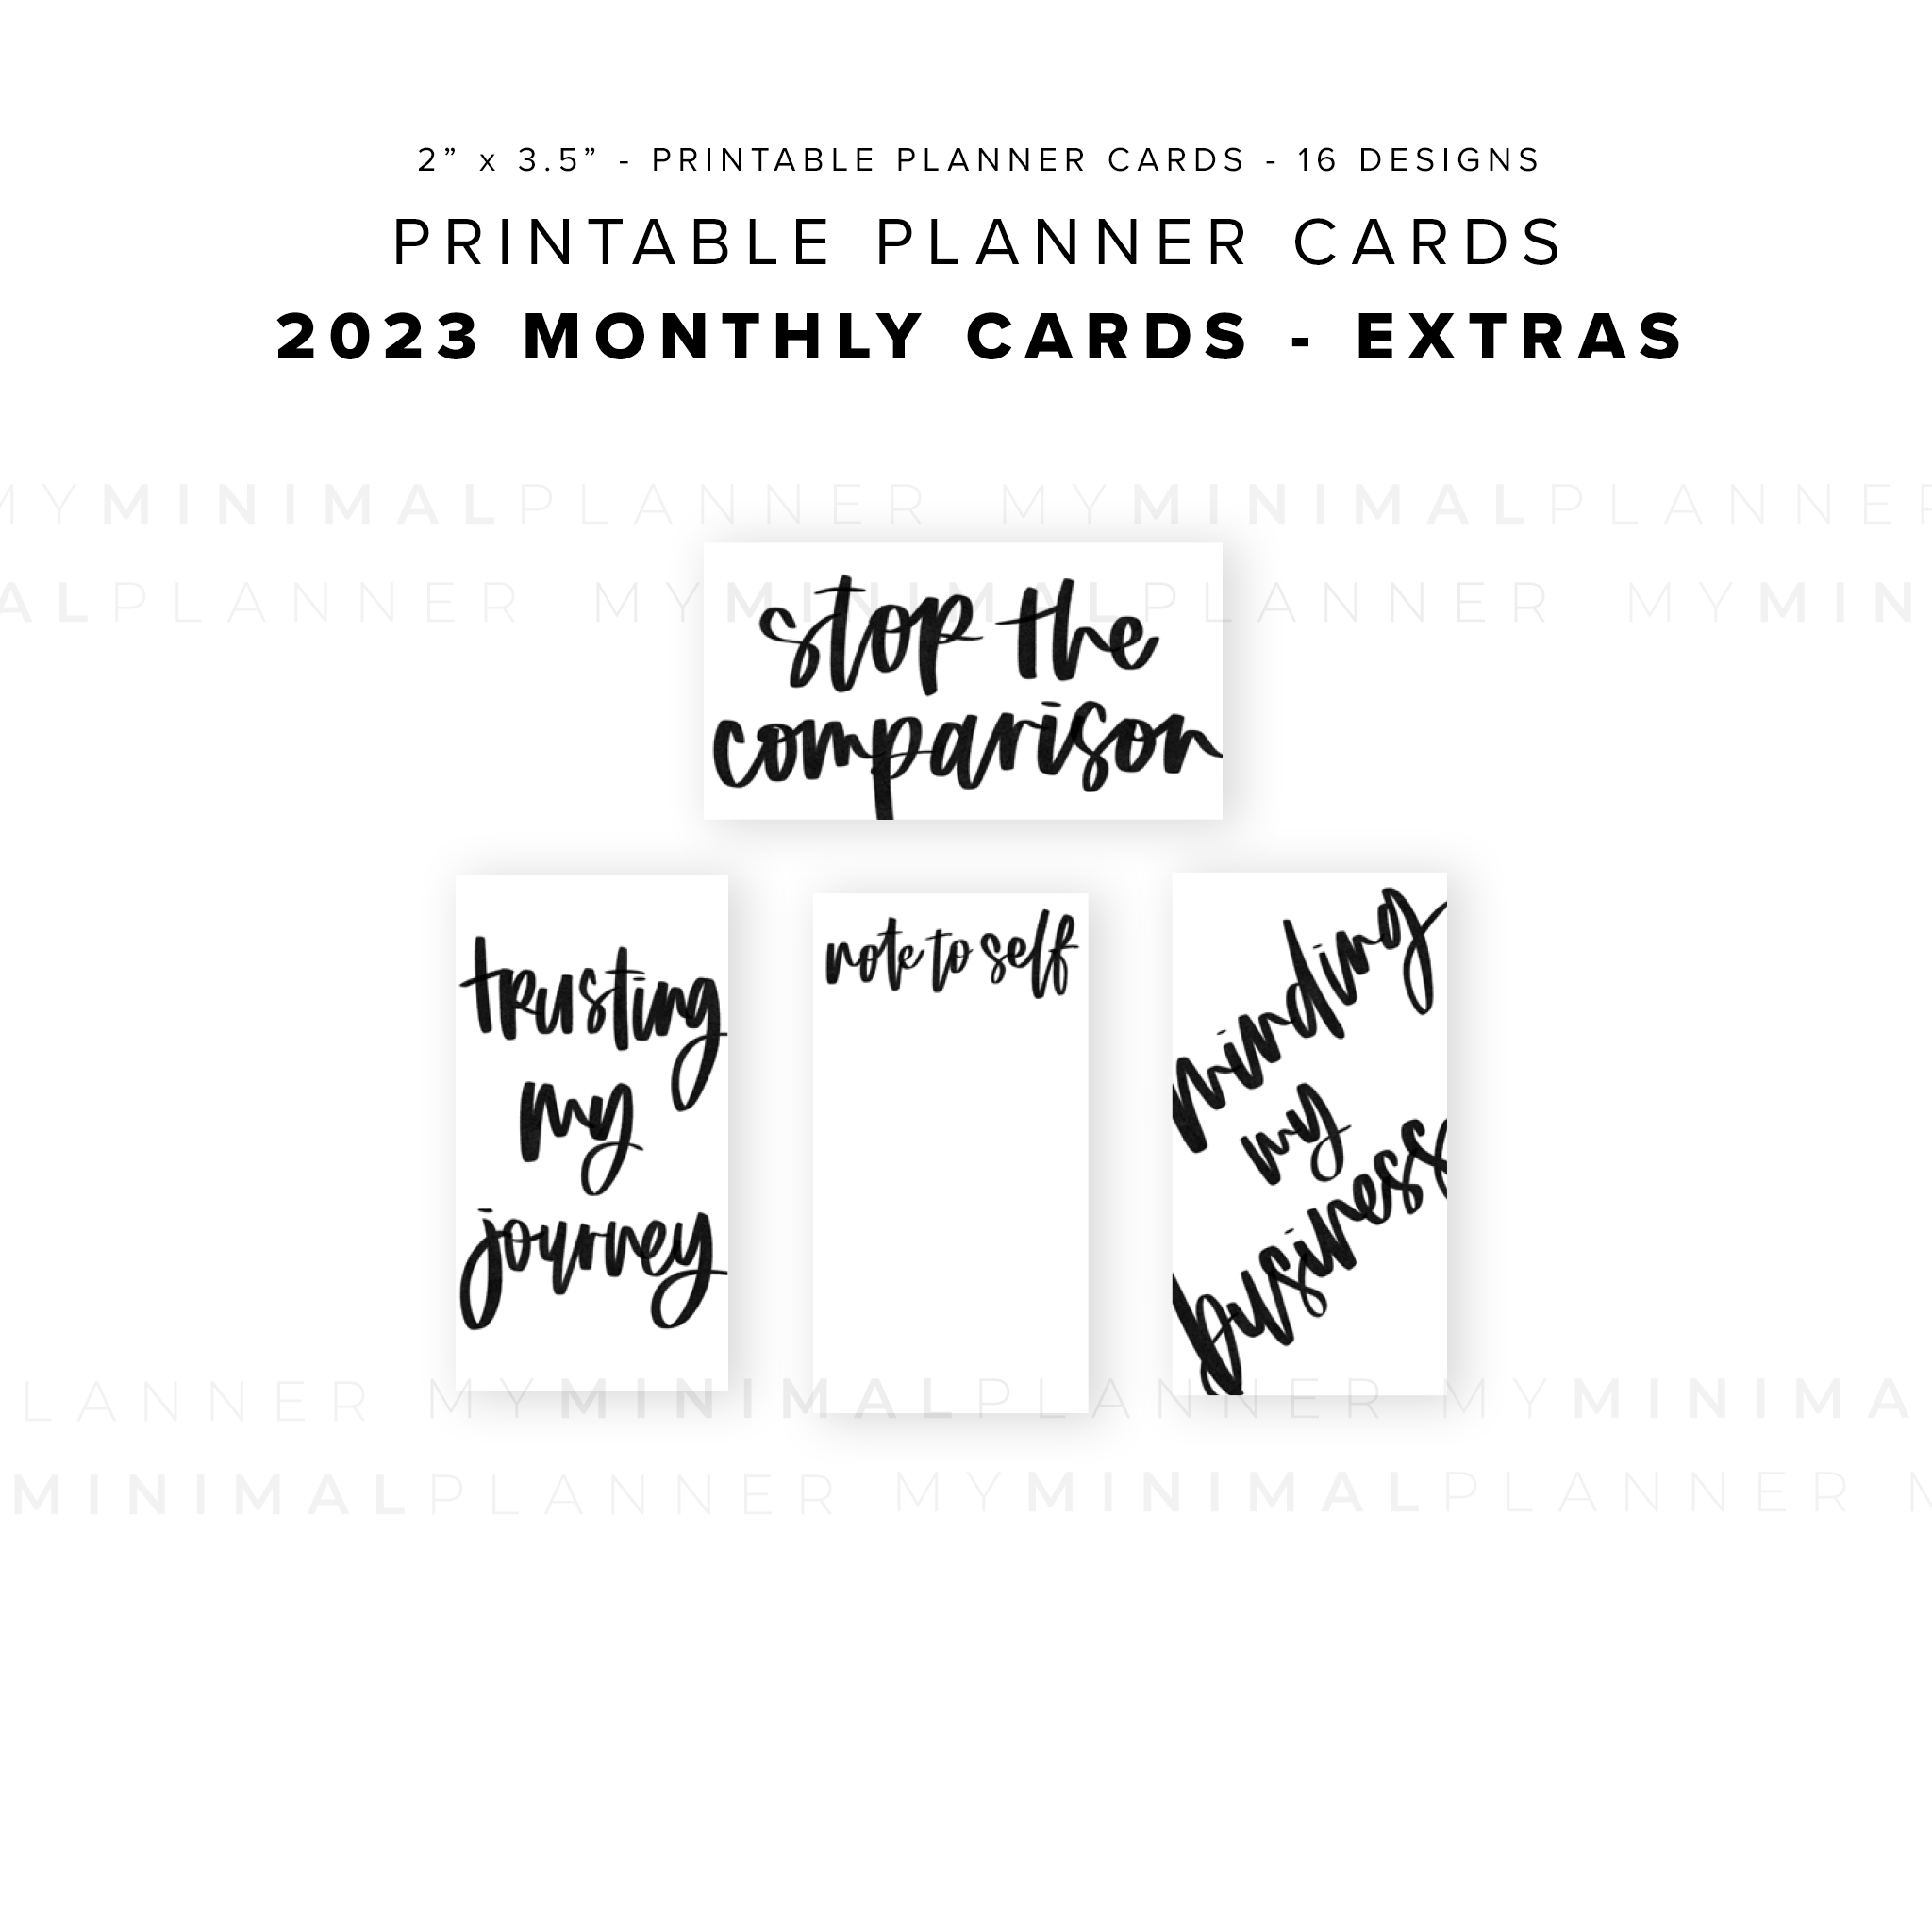 PPC06 - 2023 Monthly Cards - Printable Planner Cards